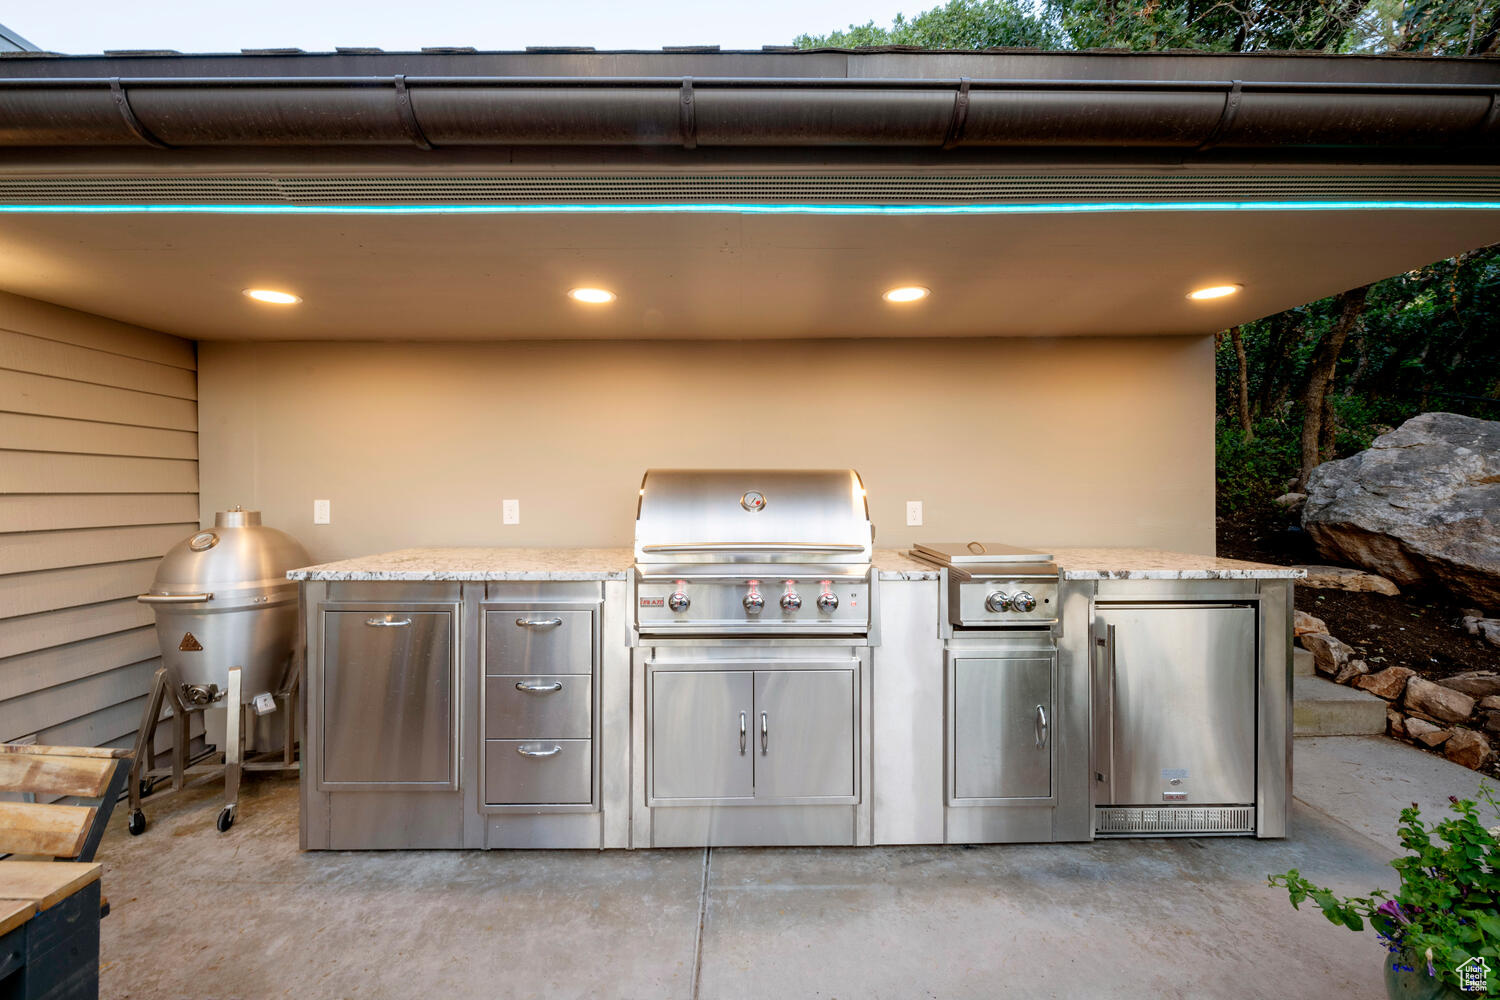 View of outdoor kitchen w/insulated and fire resistant overhang